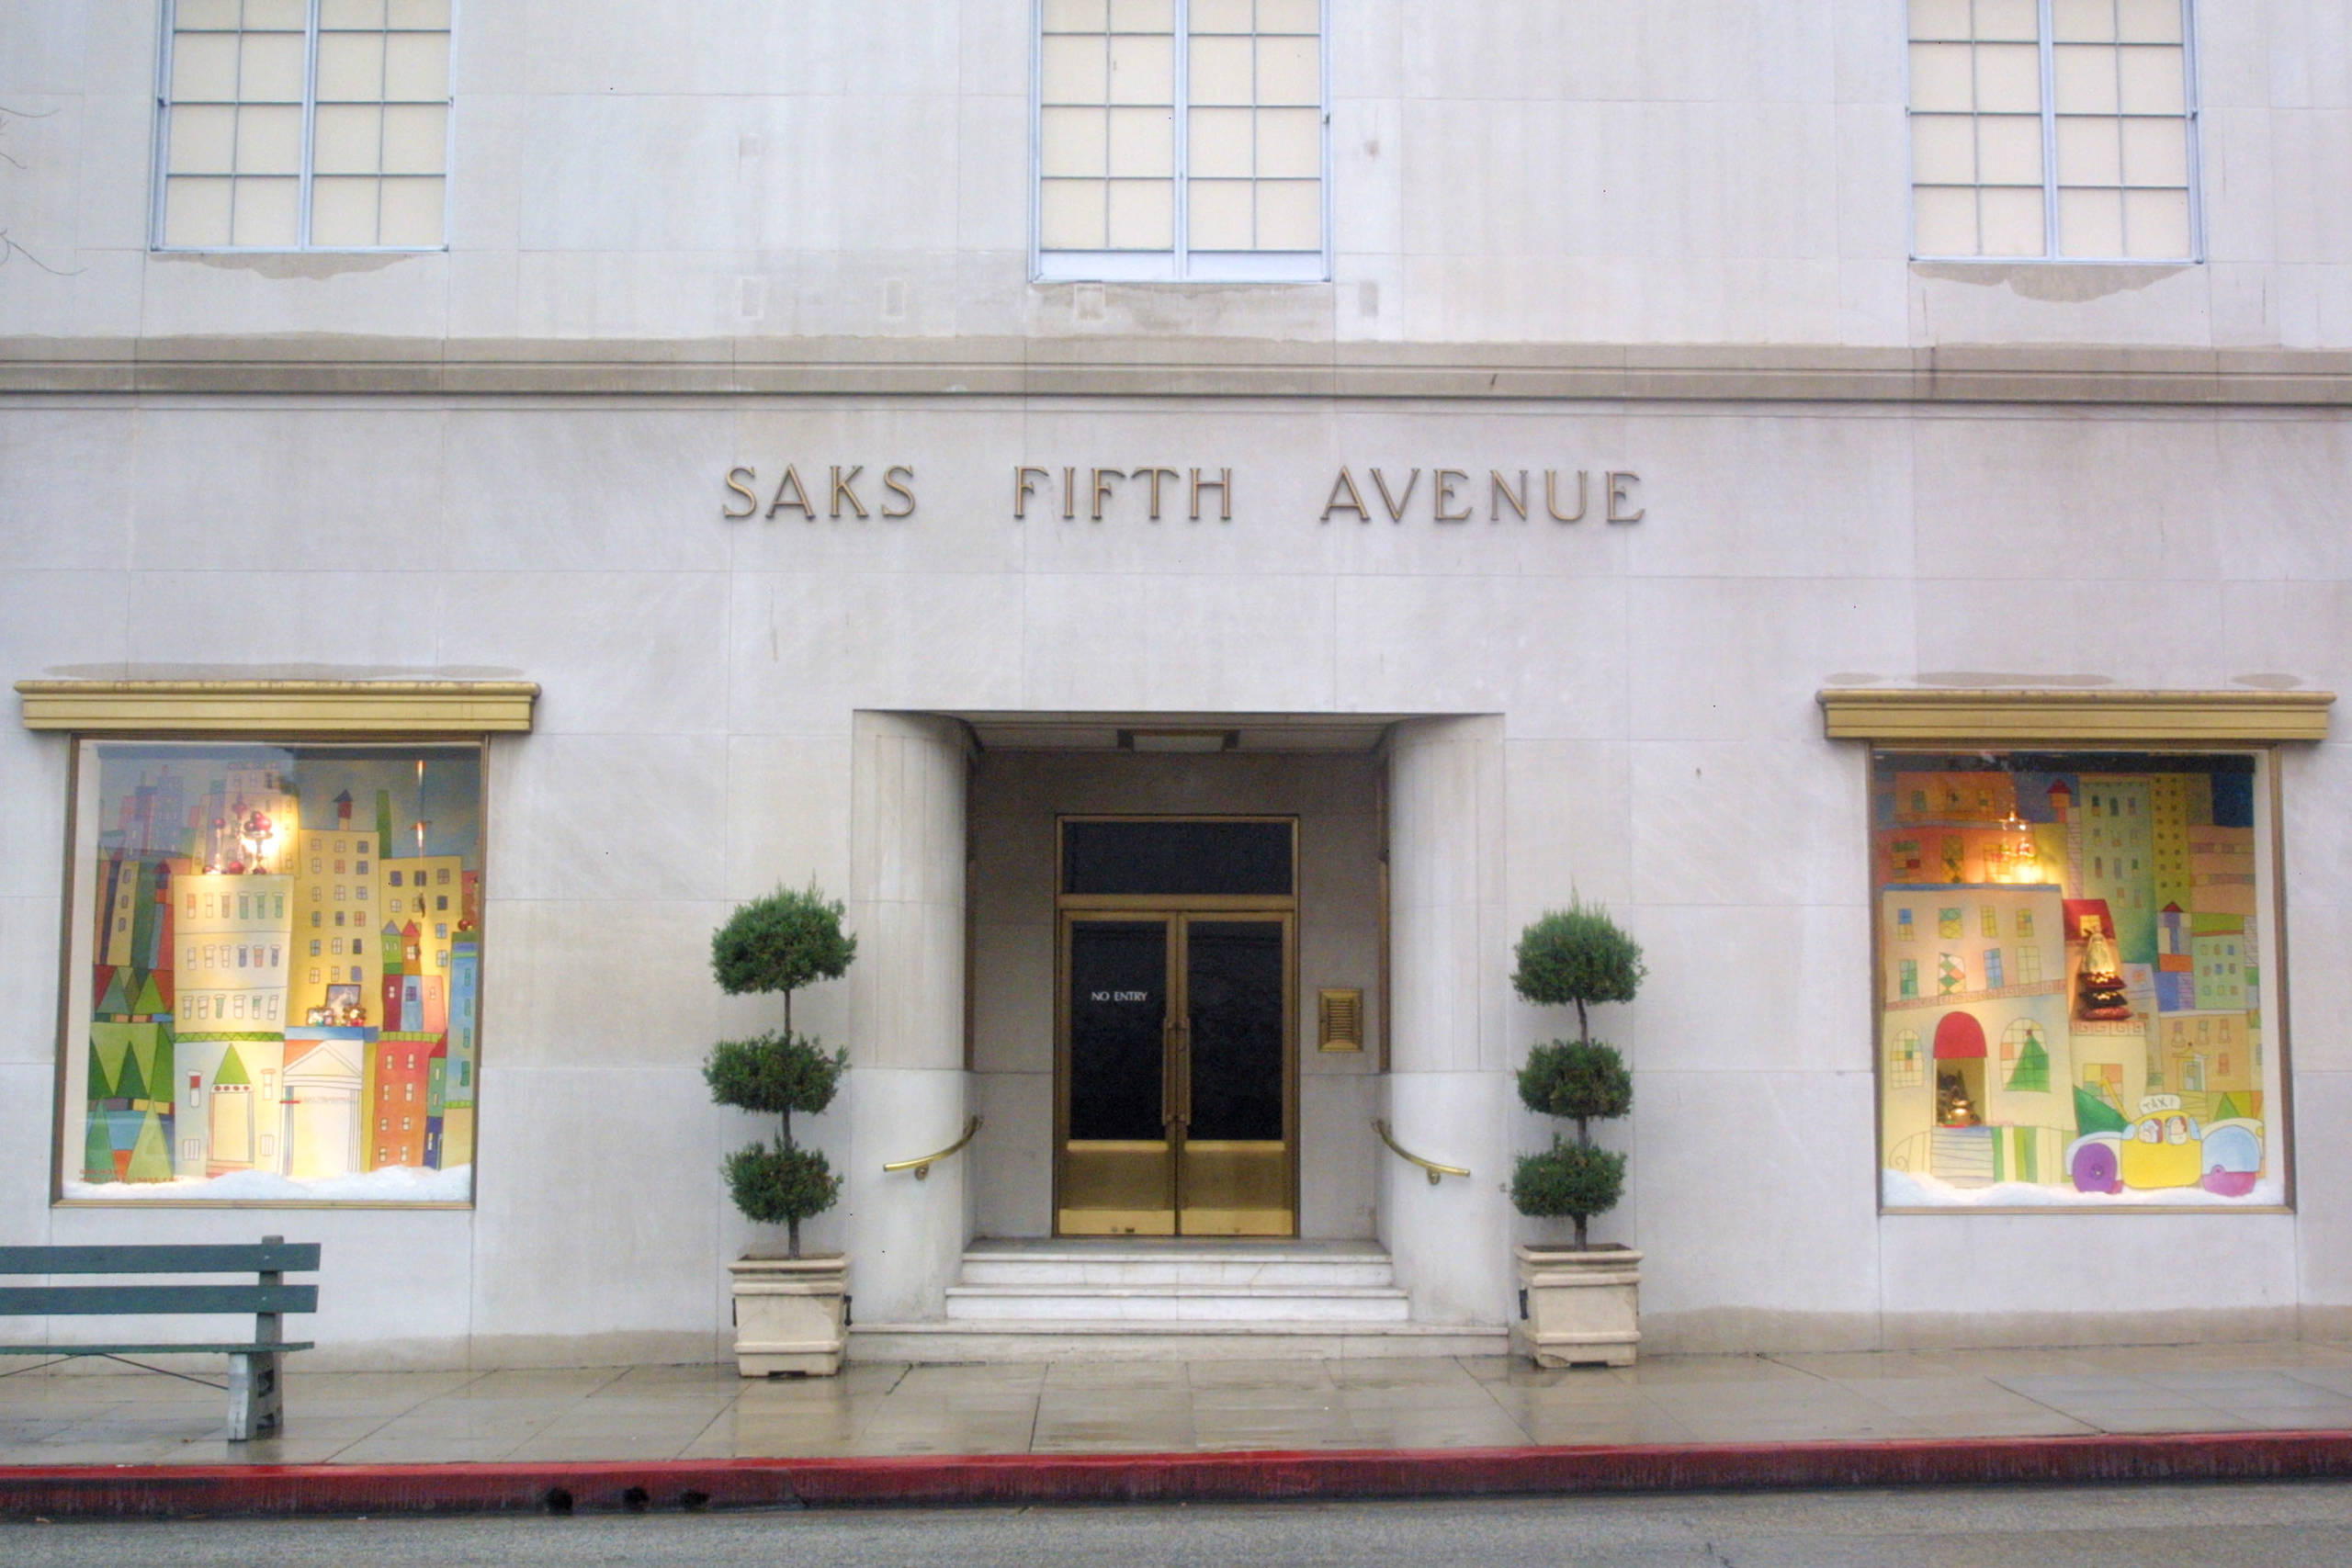 the front of a Saks Fifth Avenue store as seen from across the street